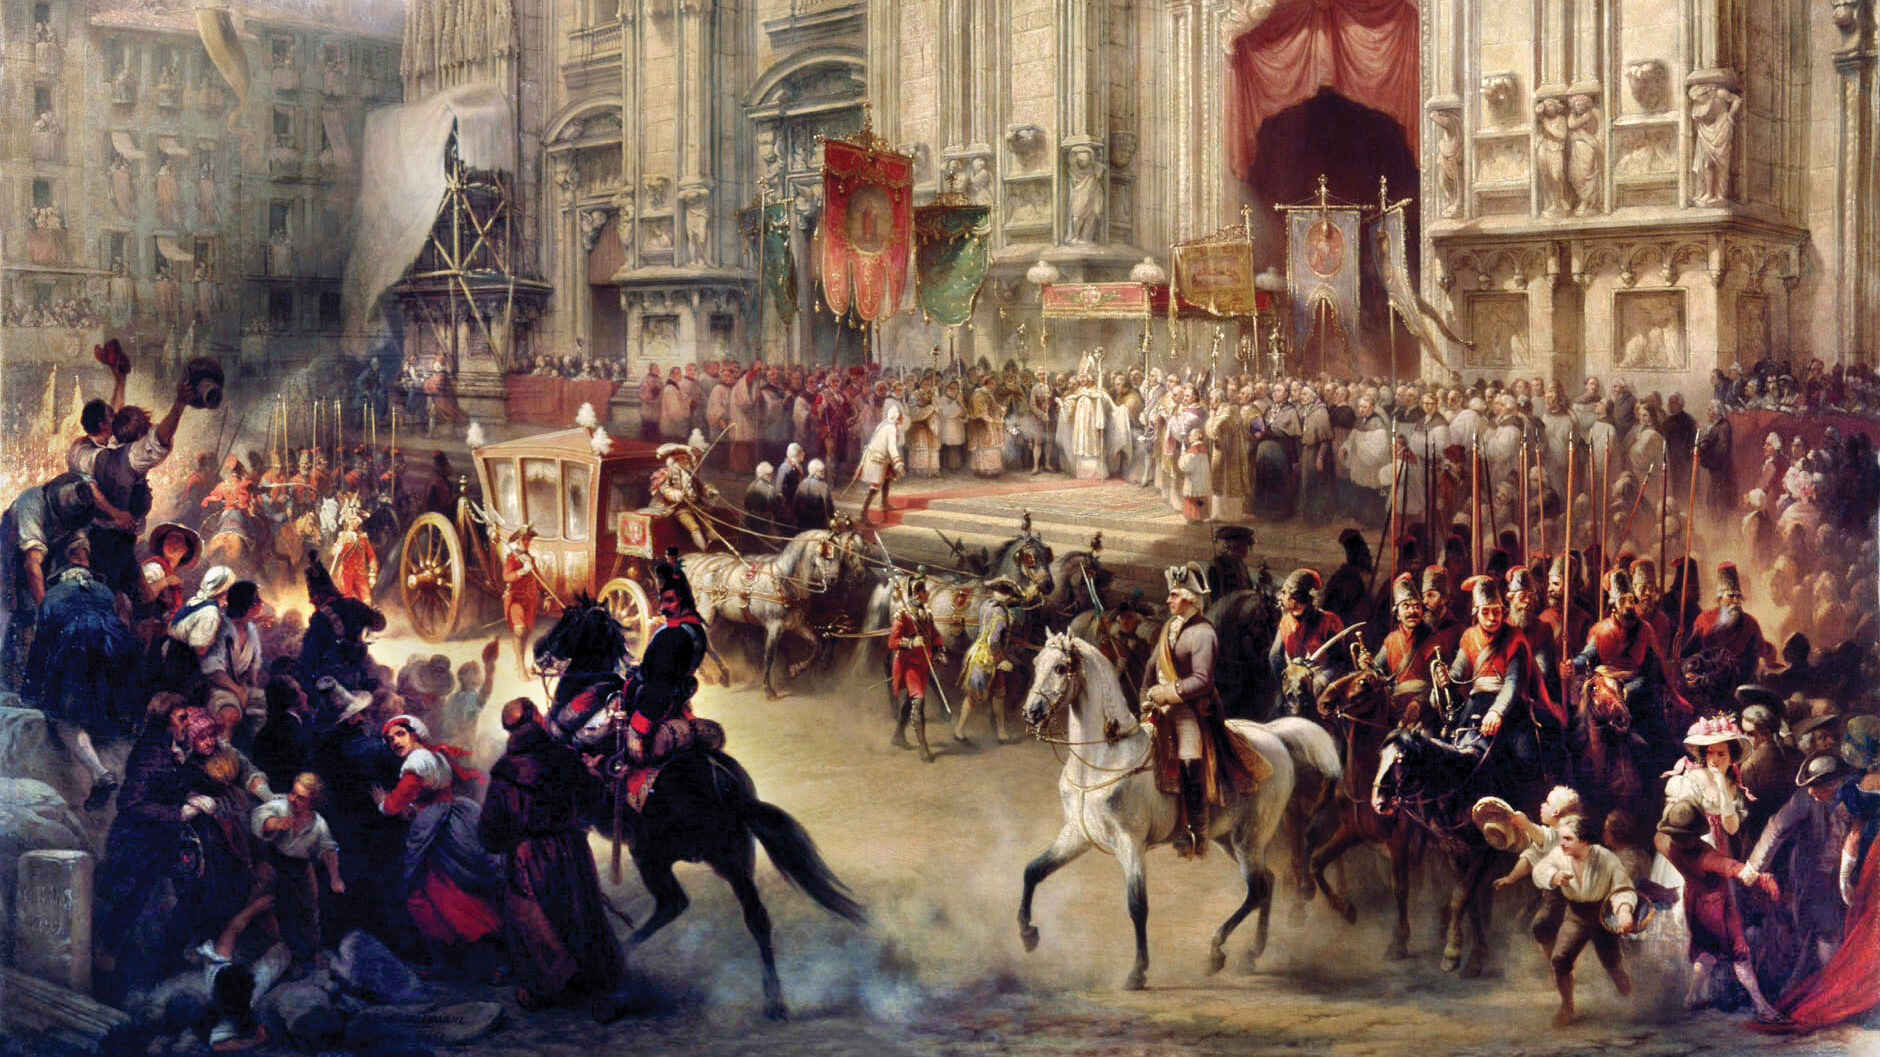 Suvorov enters Milan in triumph on April 29, 1799. When the Russian marshal advanced west into Piedmont, which was not an Austrian objective, the Austrians became suspicious of his motives. 